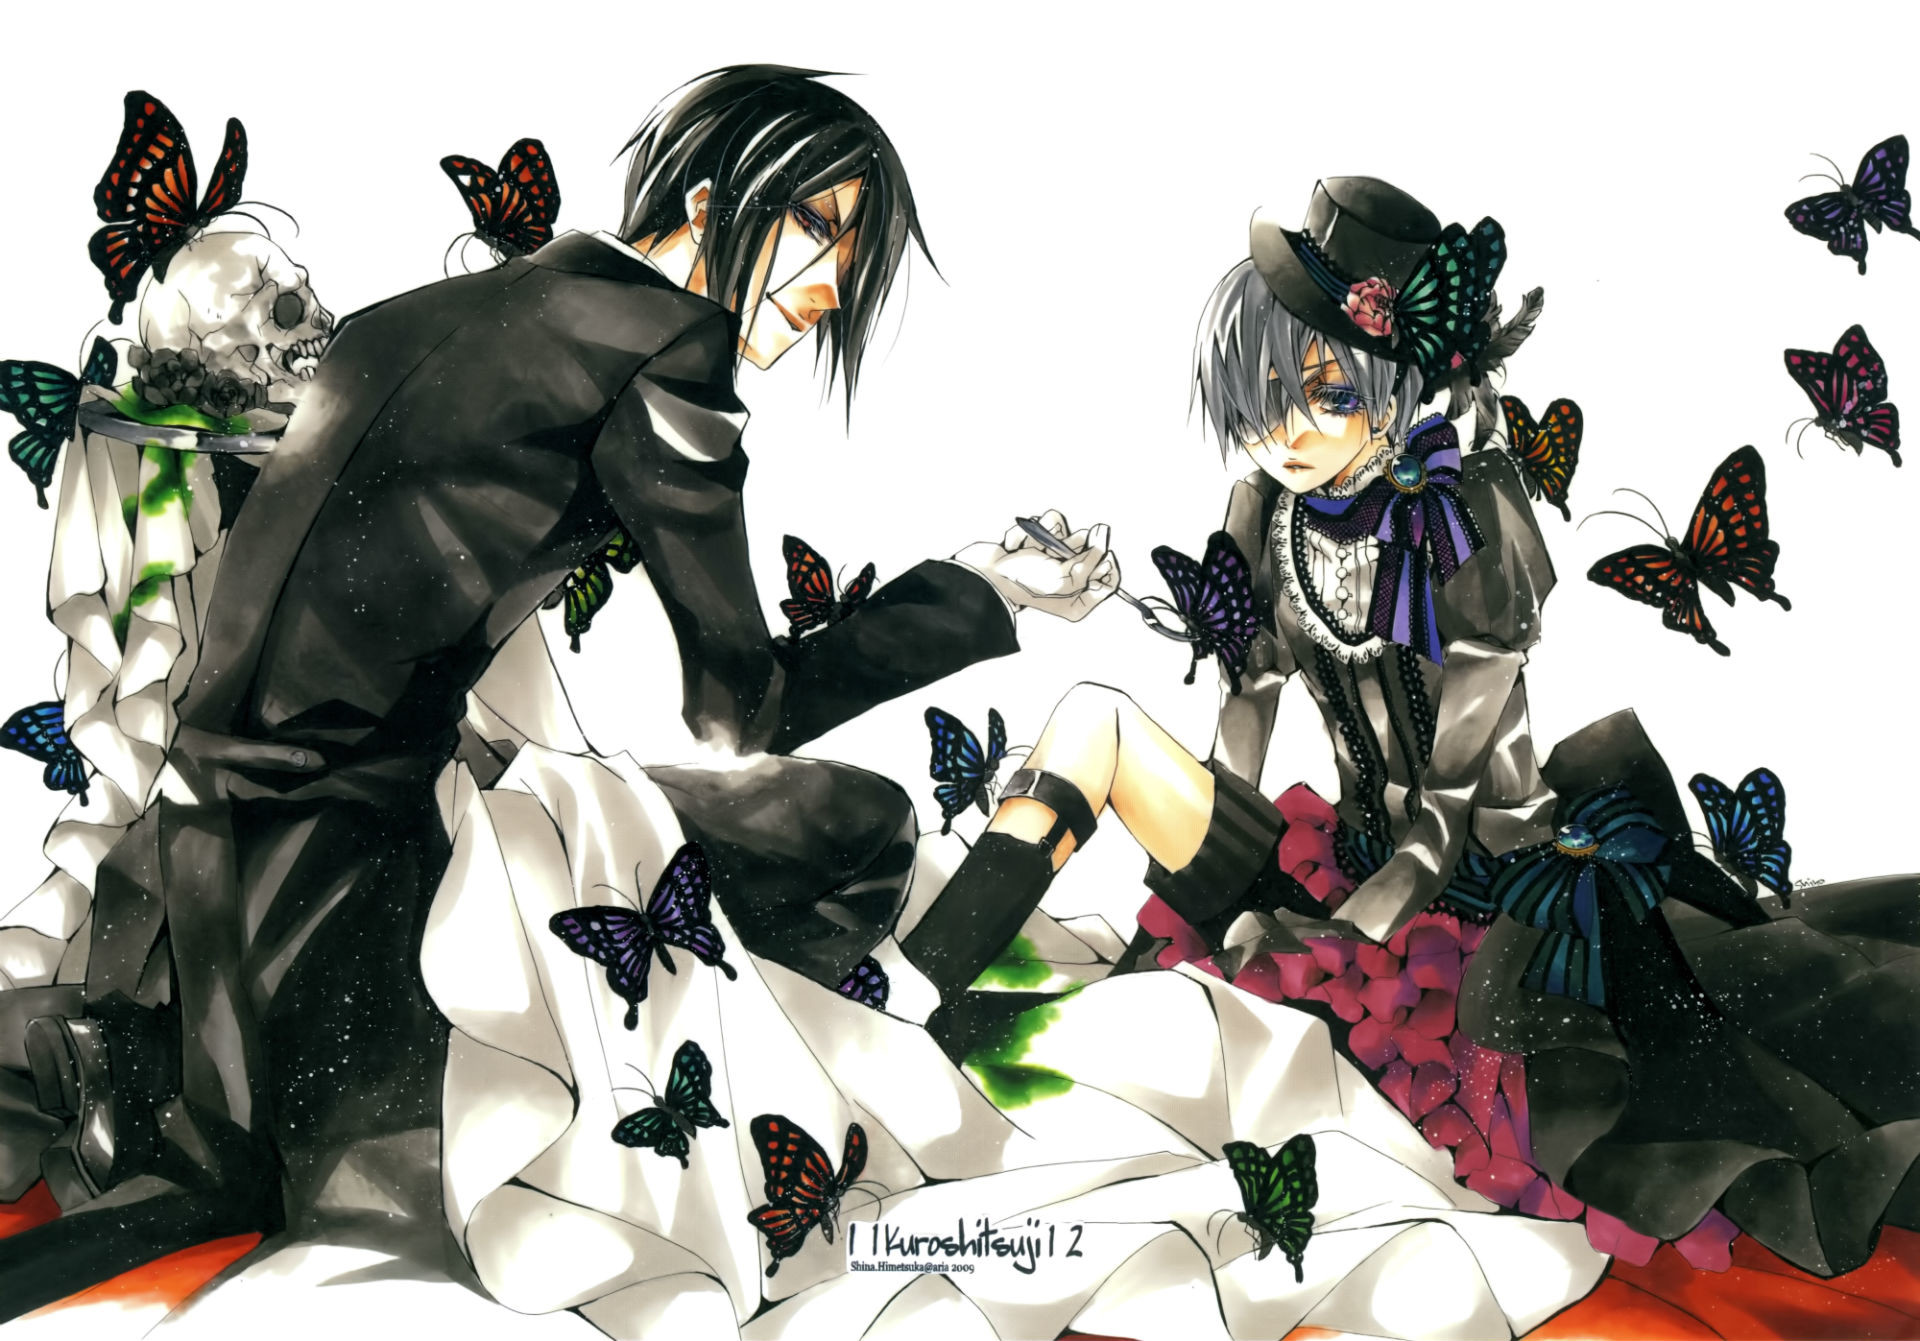 1920x1341 Black Butler wallpapers for iphone